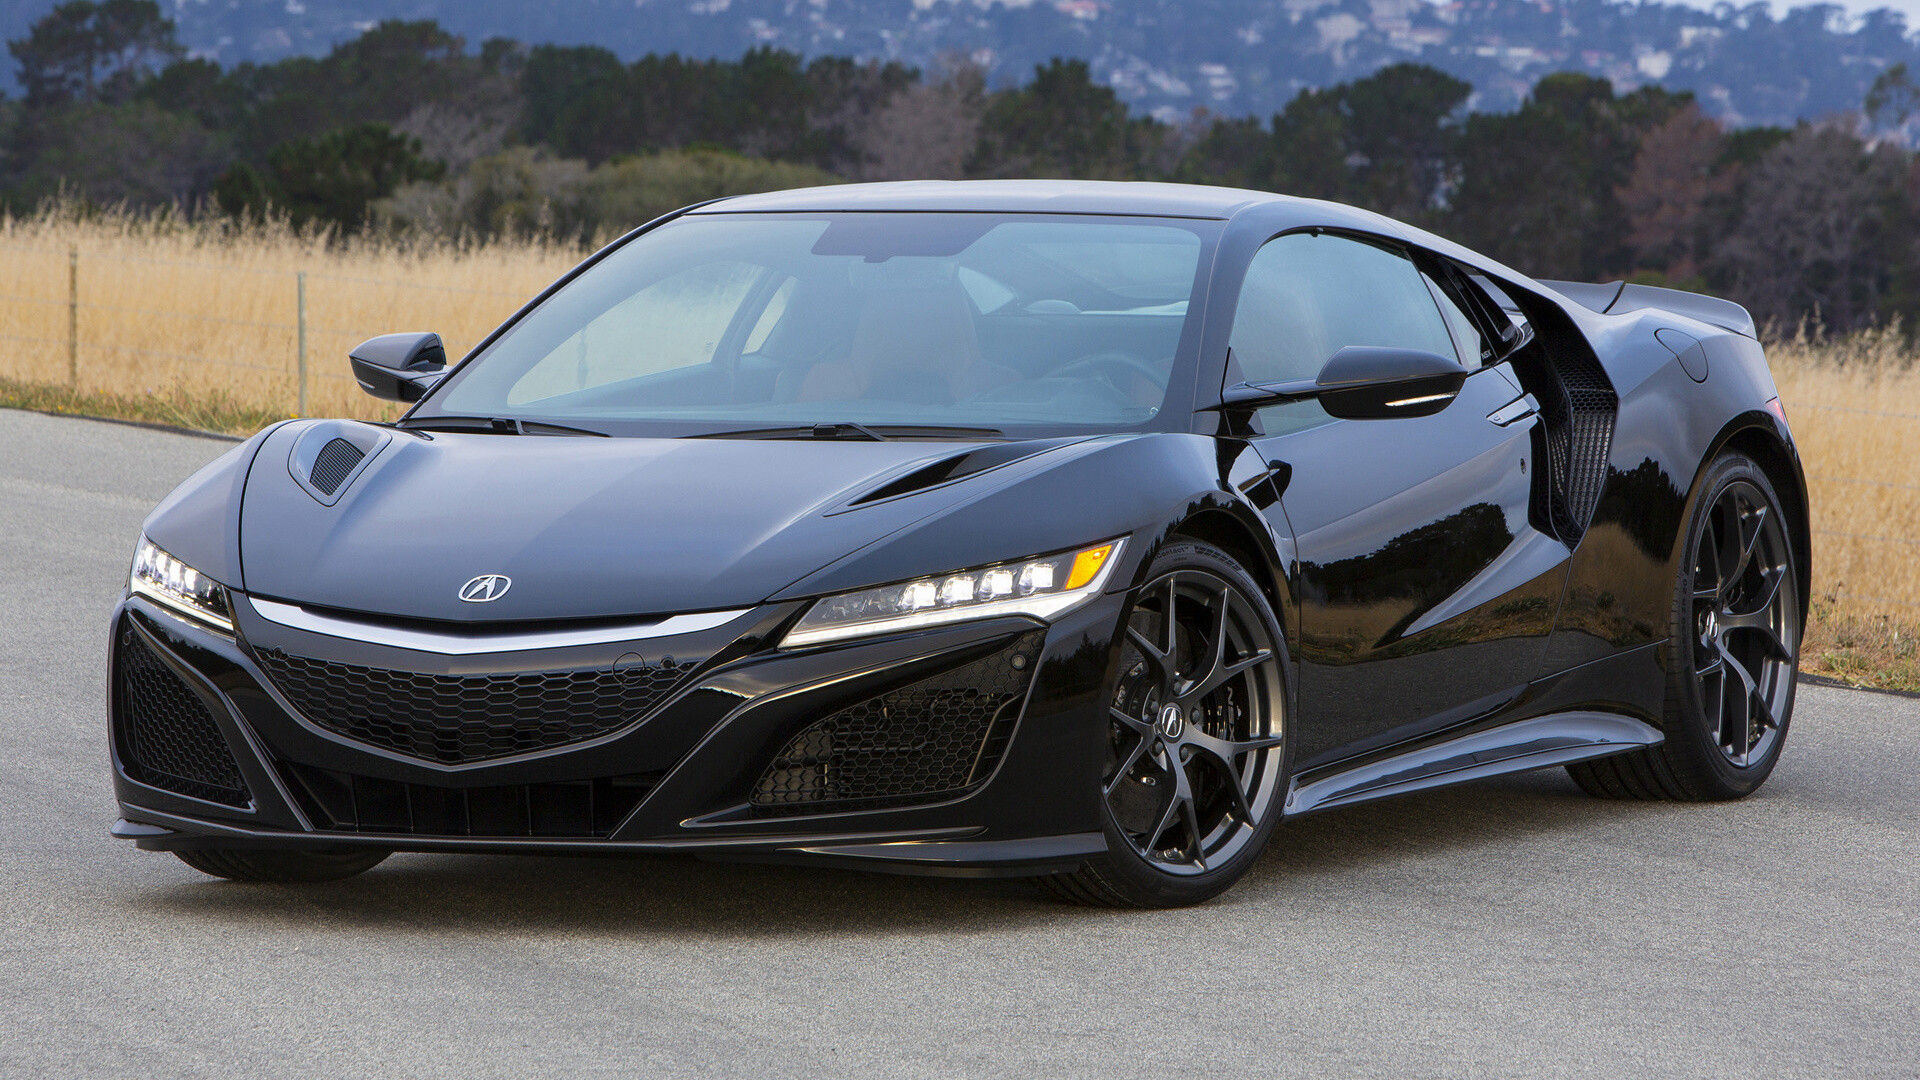 Acura: The luxury division of Japanese automaker Honda, NSX model. 1920x1080 Full HD Wallpaper.